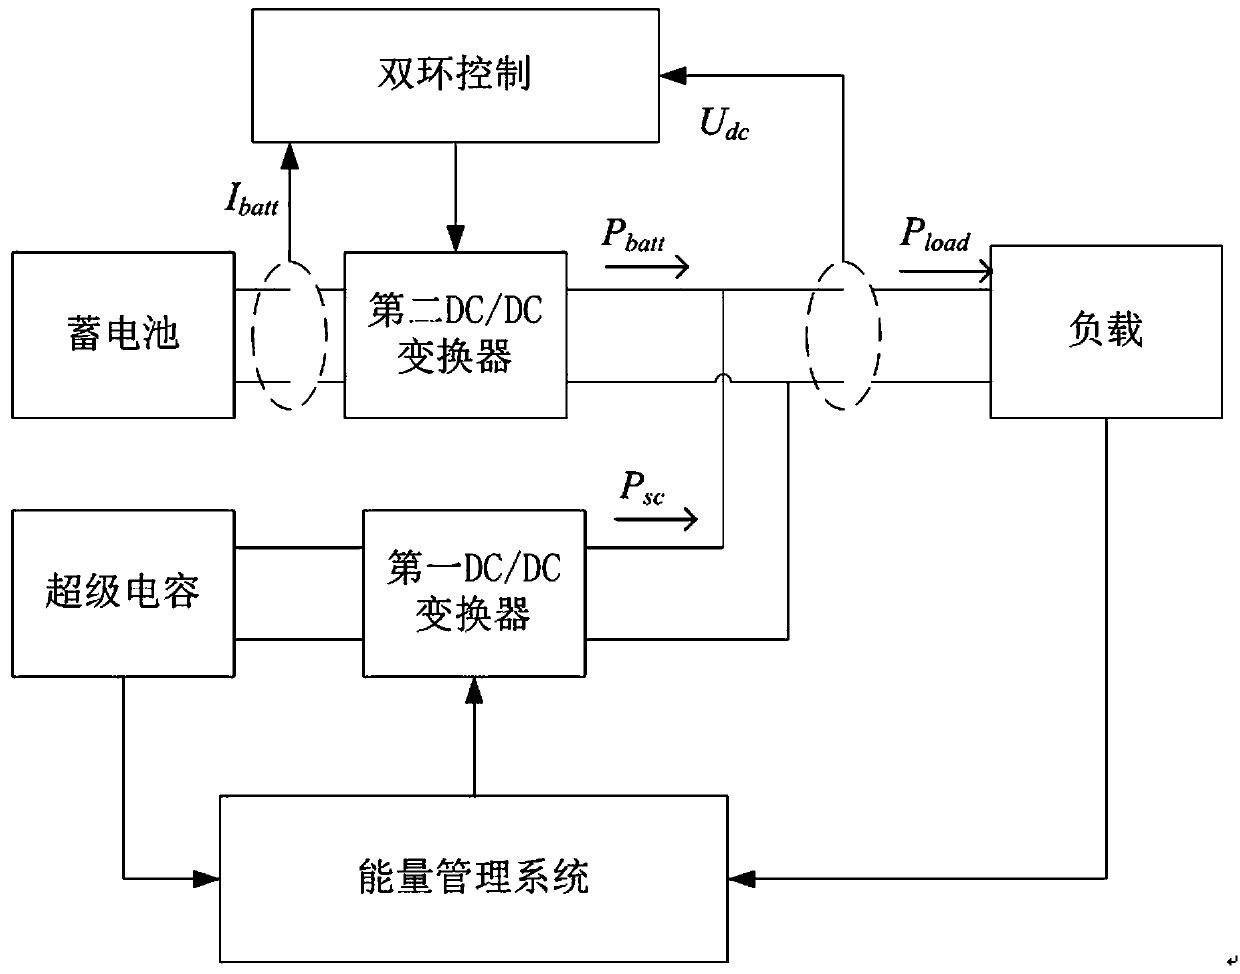 Electric vehicle hybrid power supply control method based on power tracking